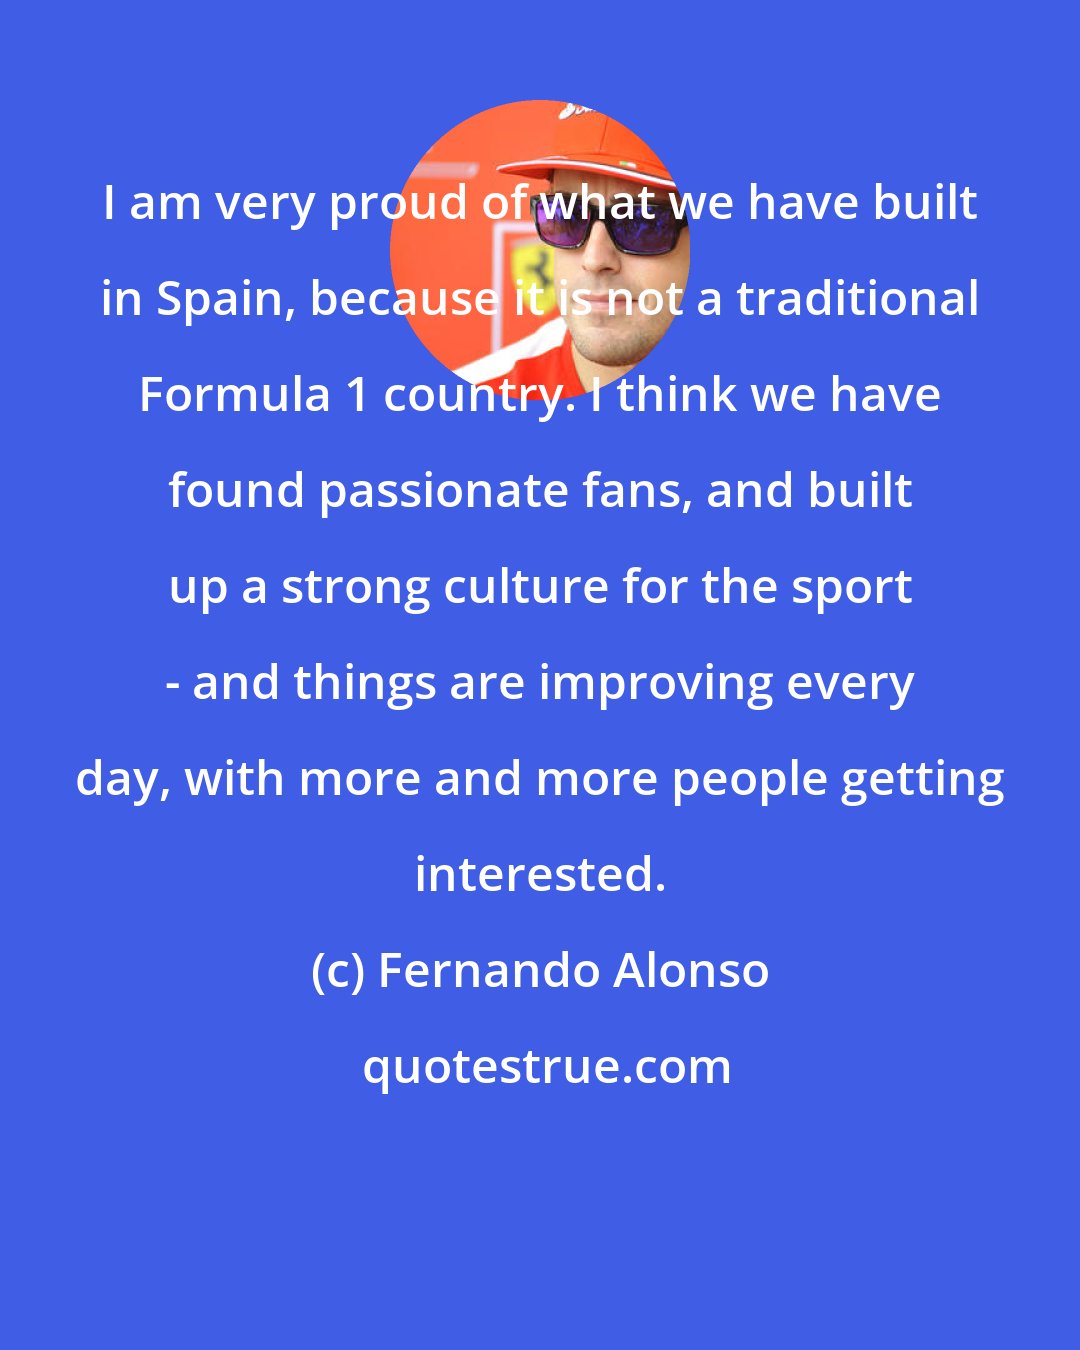 Fernando Alonso: I am very proud of what we have built in Spain, because it is not a traditional Formula 1 country. I think we have found passionate fans, and built up a strong culture for the sport - and things are improving every day, with more and more people getting interested.